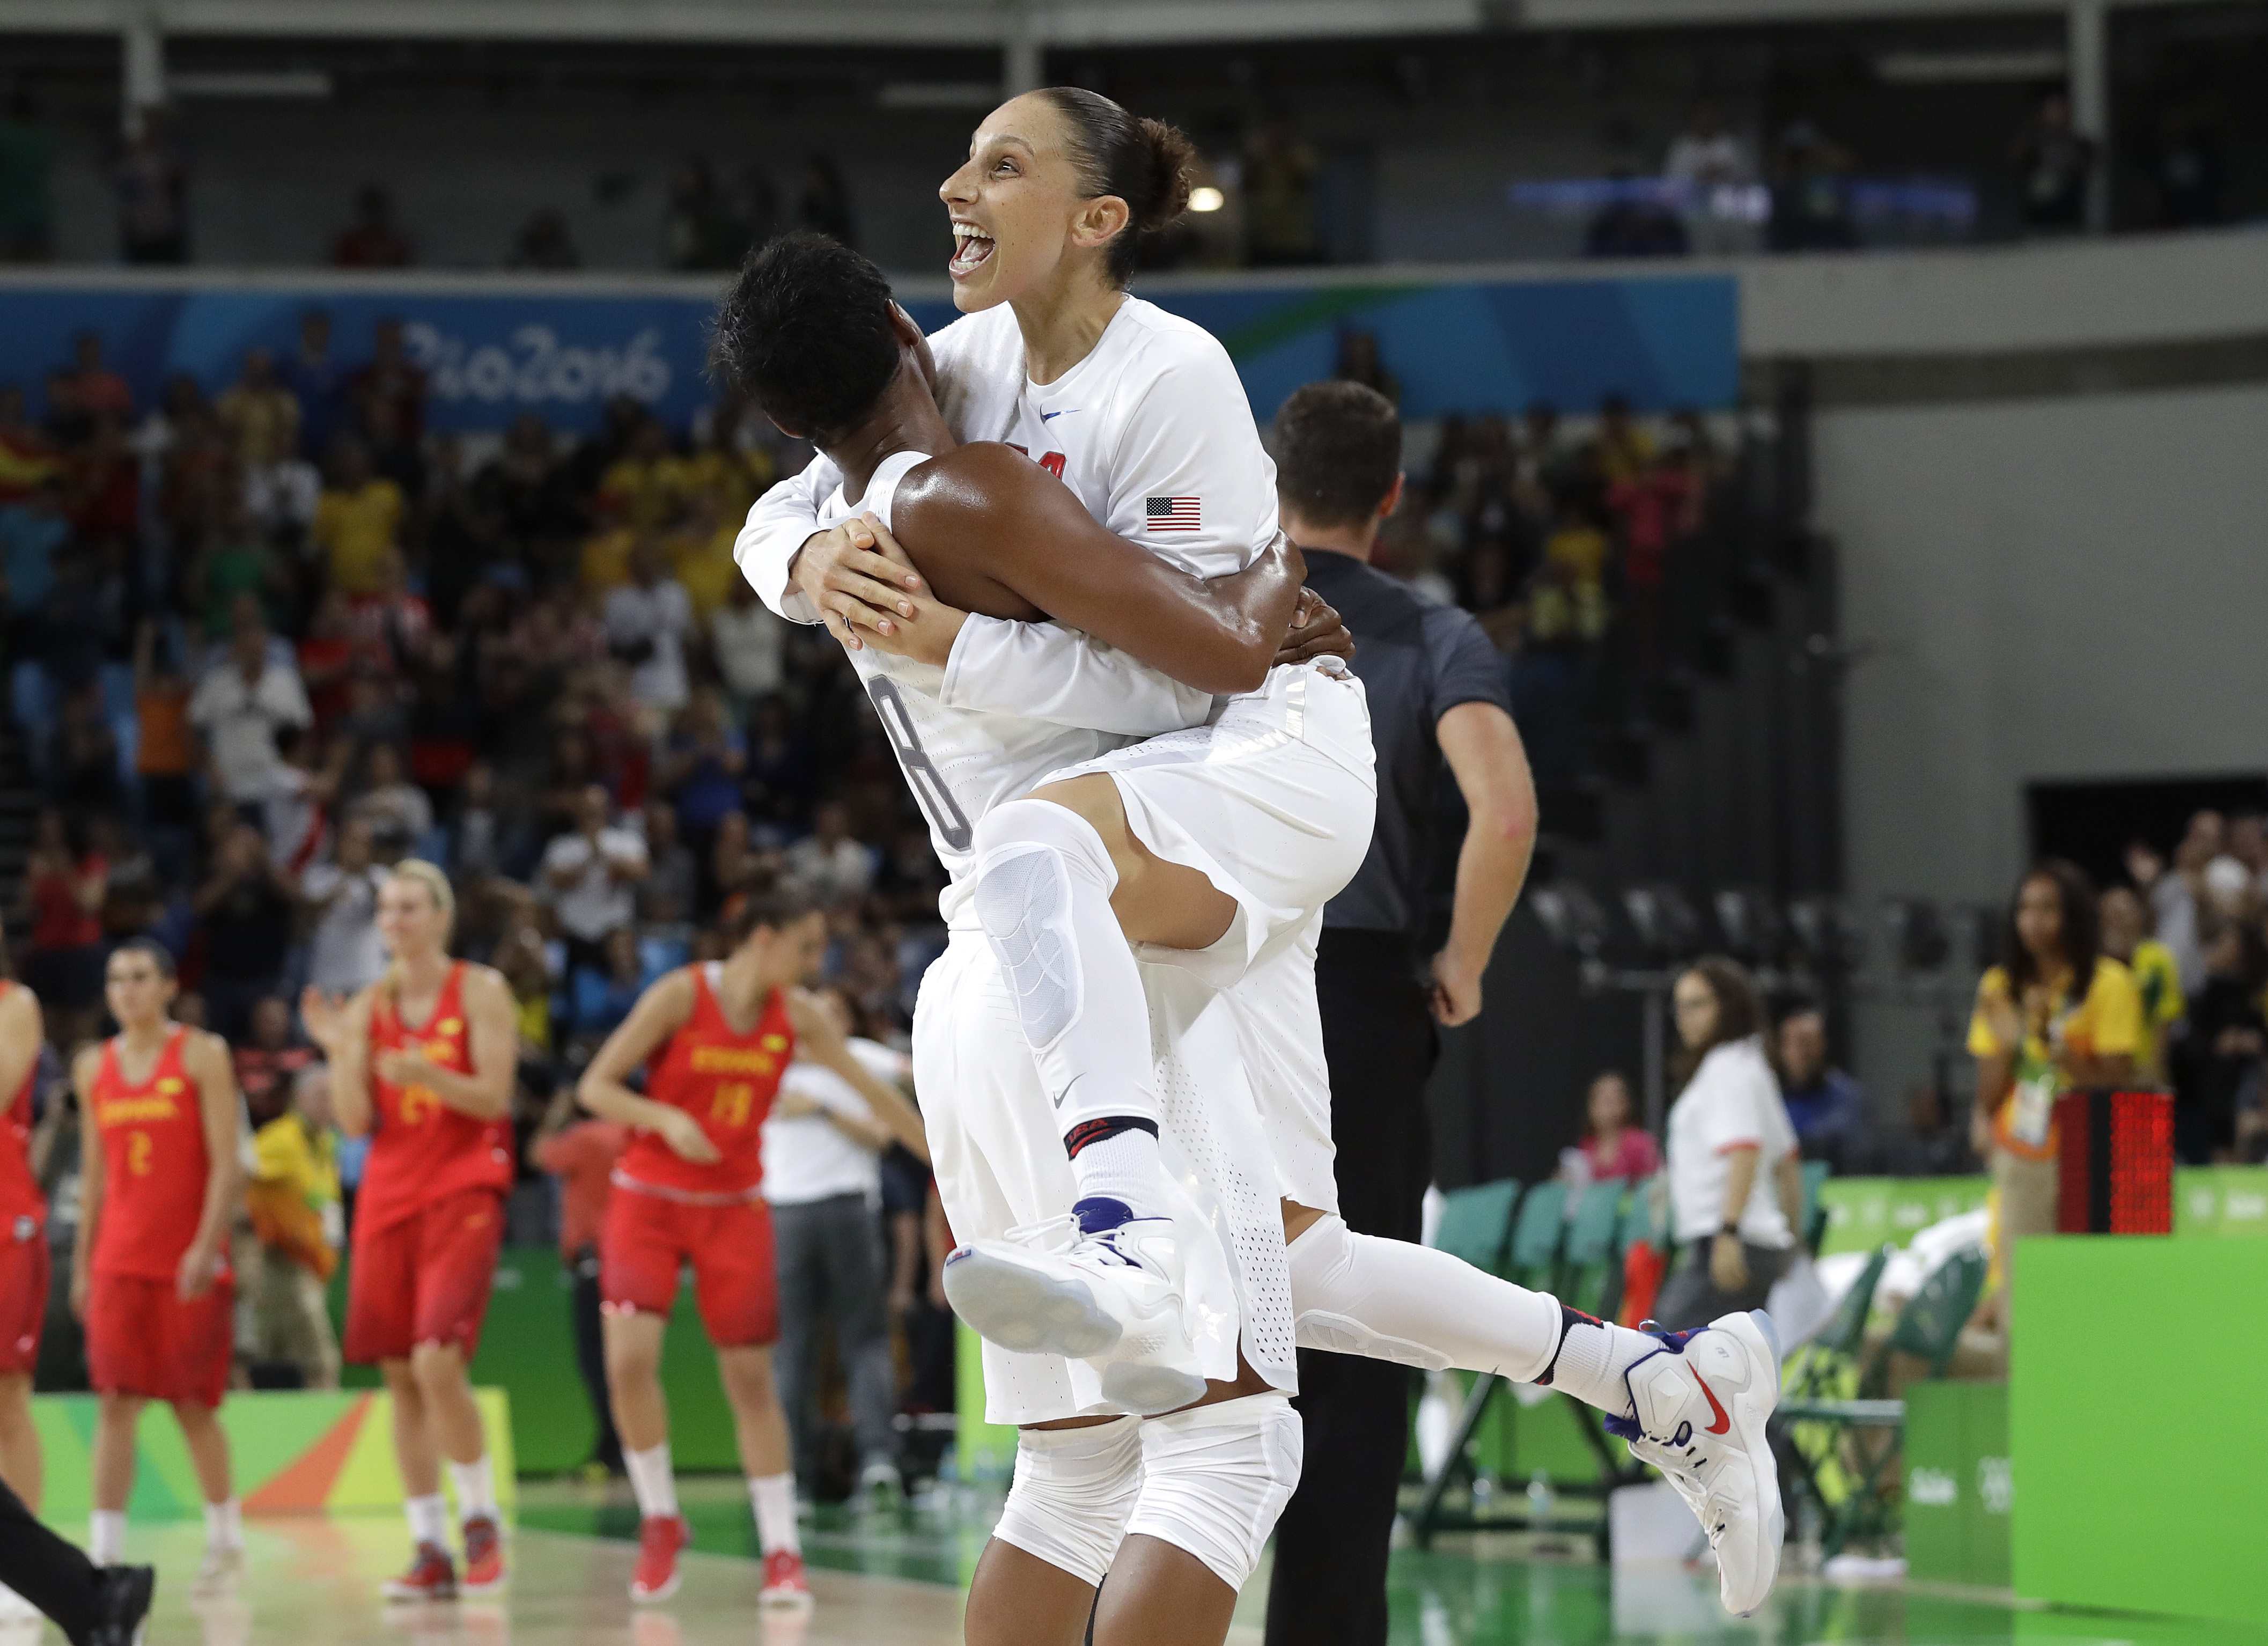 Diana Taurasi leaps into the arms of teammate Angel McCoughtry as they celebrate their win over Spain in a women's gold medal basketball game at the 2016 Summer Olympics, on Aug. 20, 2016. (Eric Gay—AP)